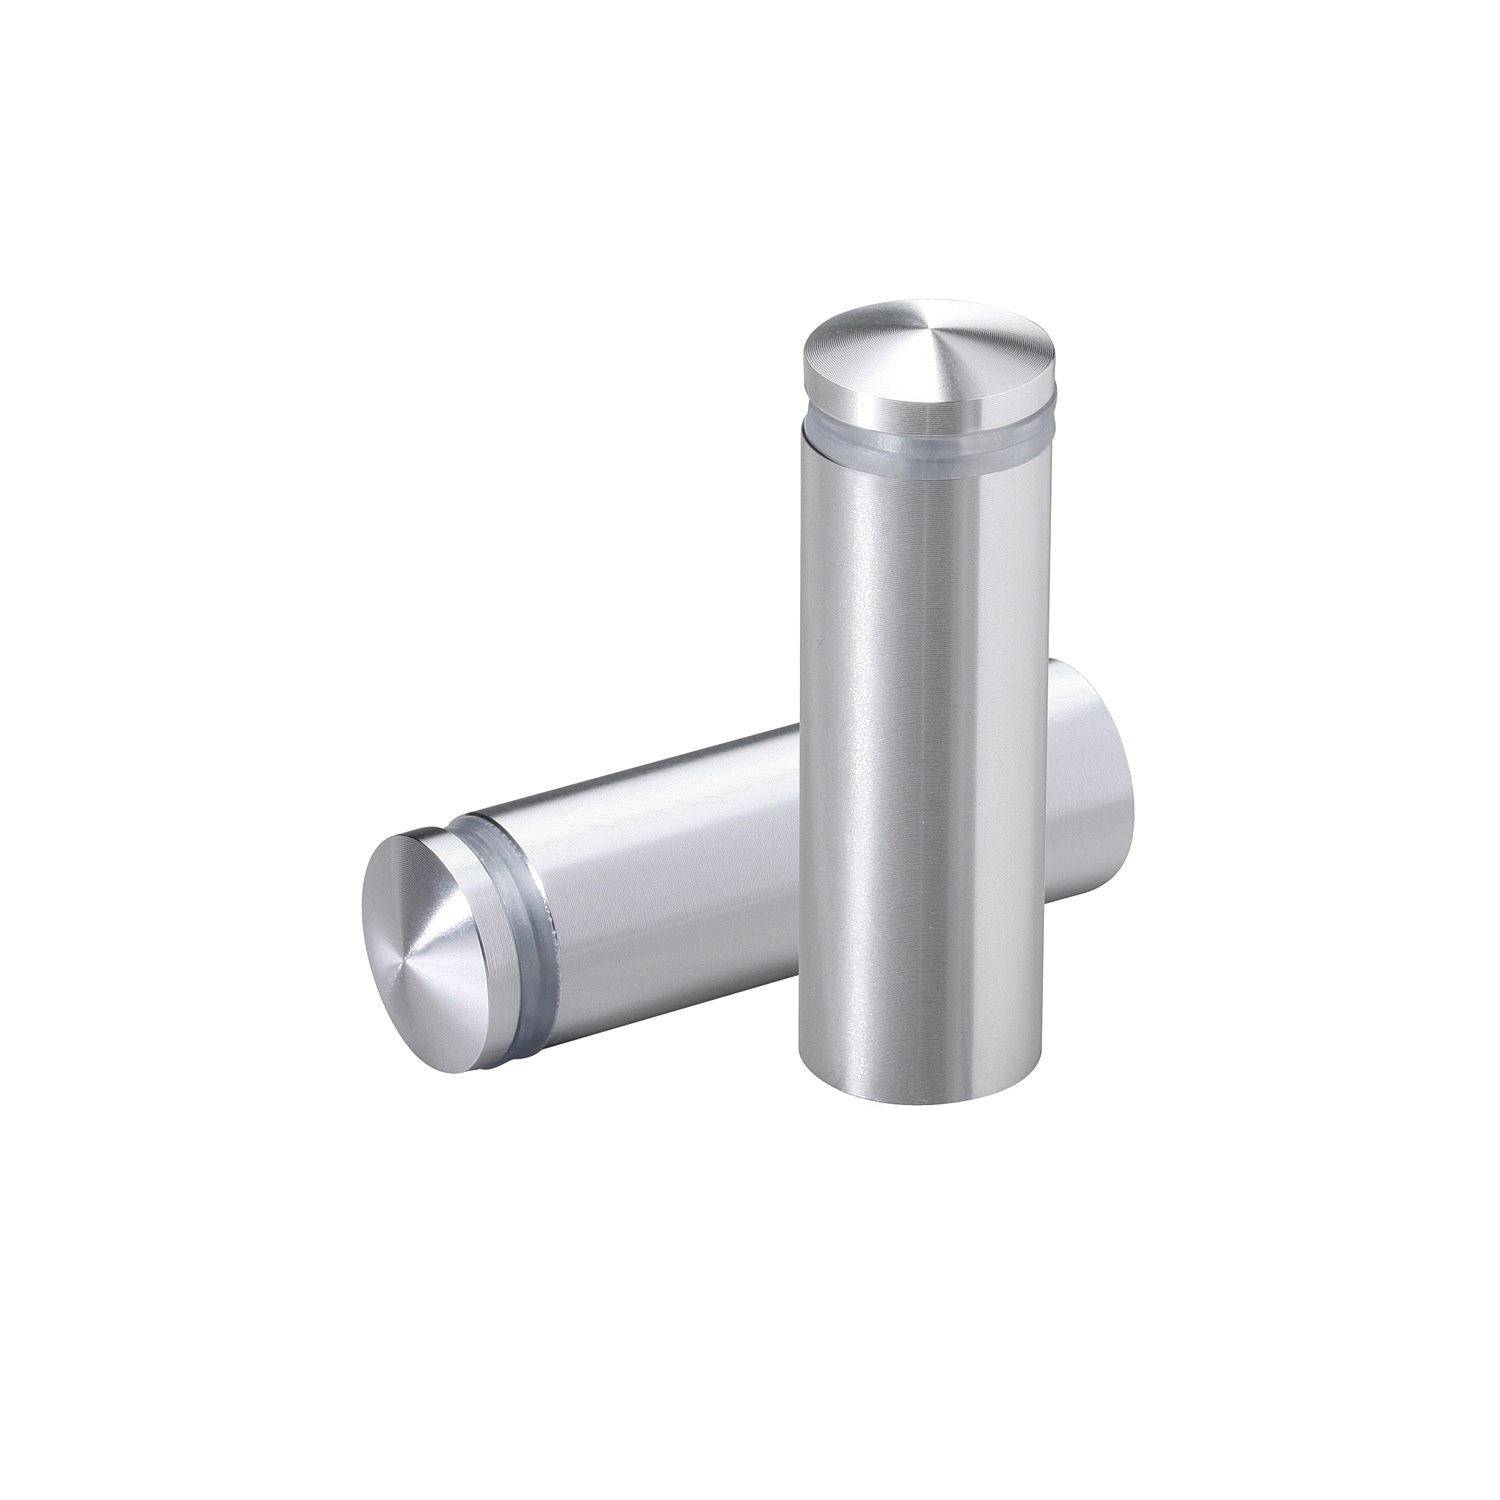 5/8'' Diameter X 1-3/4'' Barrel Length, Aluminum Rounded Head Standoffs, Shiny Anodized Finish Easy Fasten Standoff (For Inside / Outside use) [Required Material Hole Size: 7/16'']